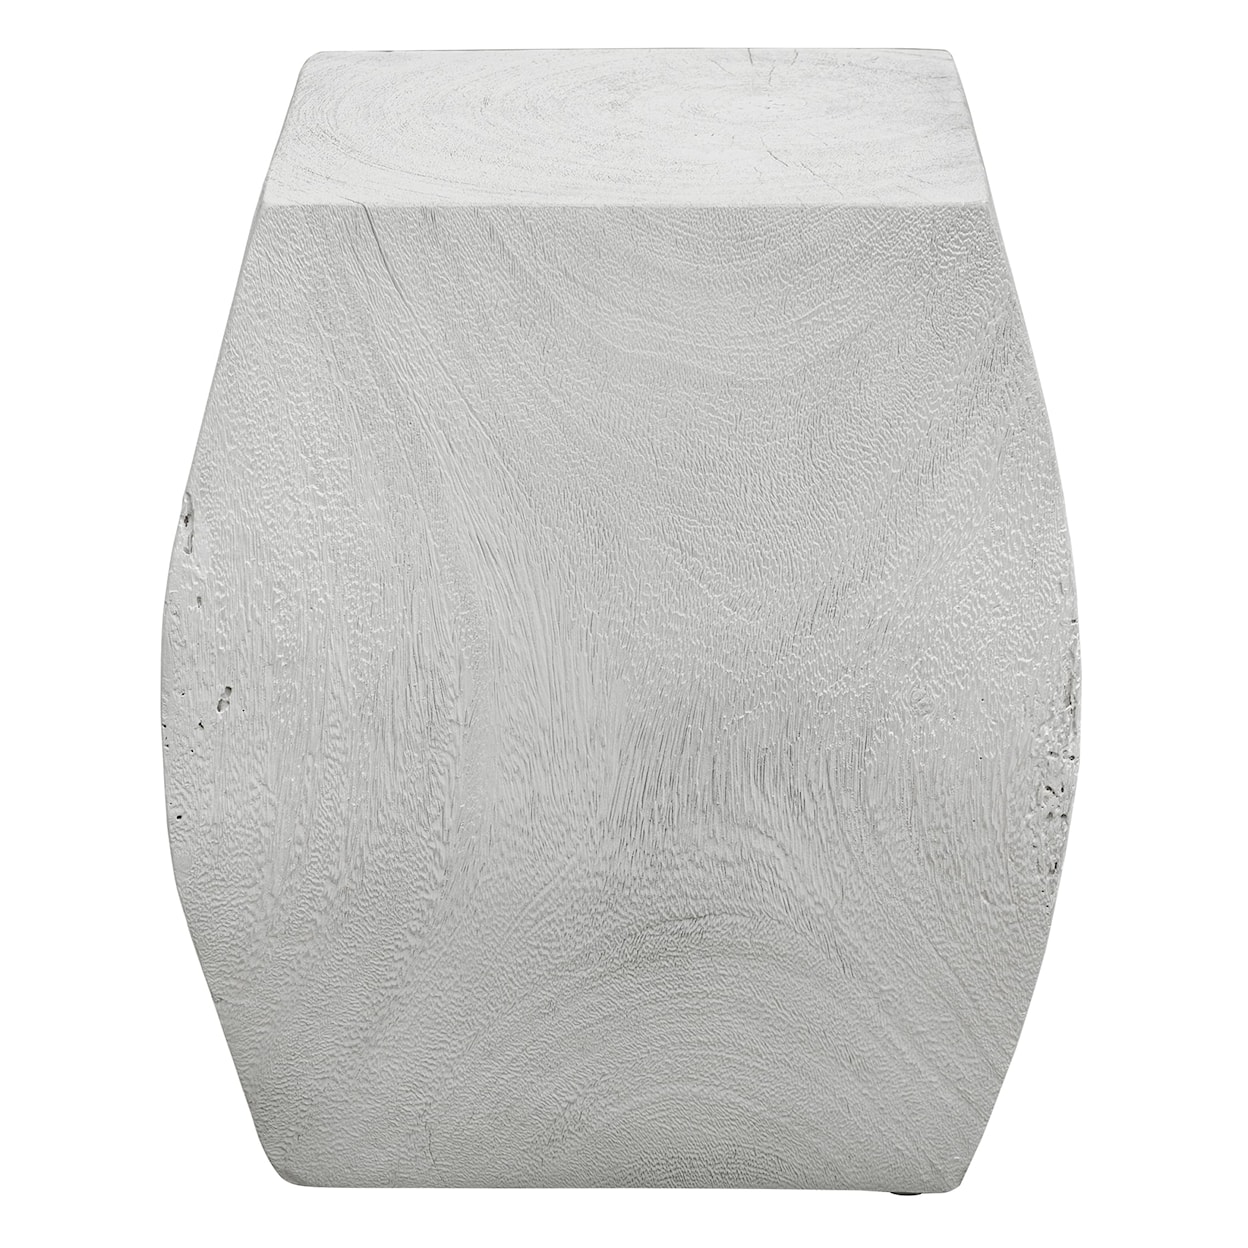 Uttermost Grove Grove Ivory Wooden Accent Stool